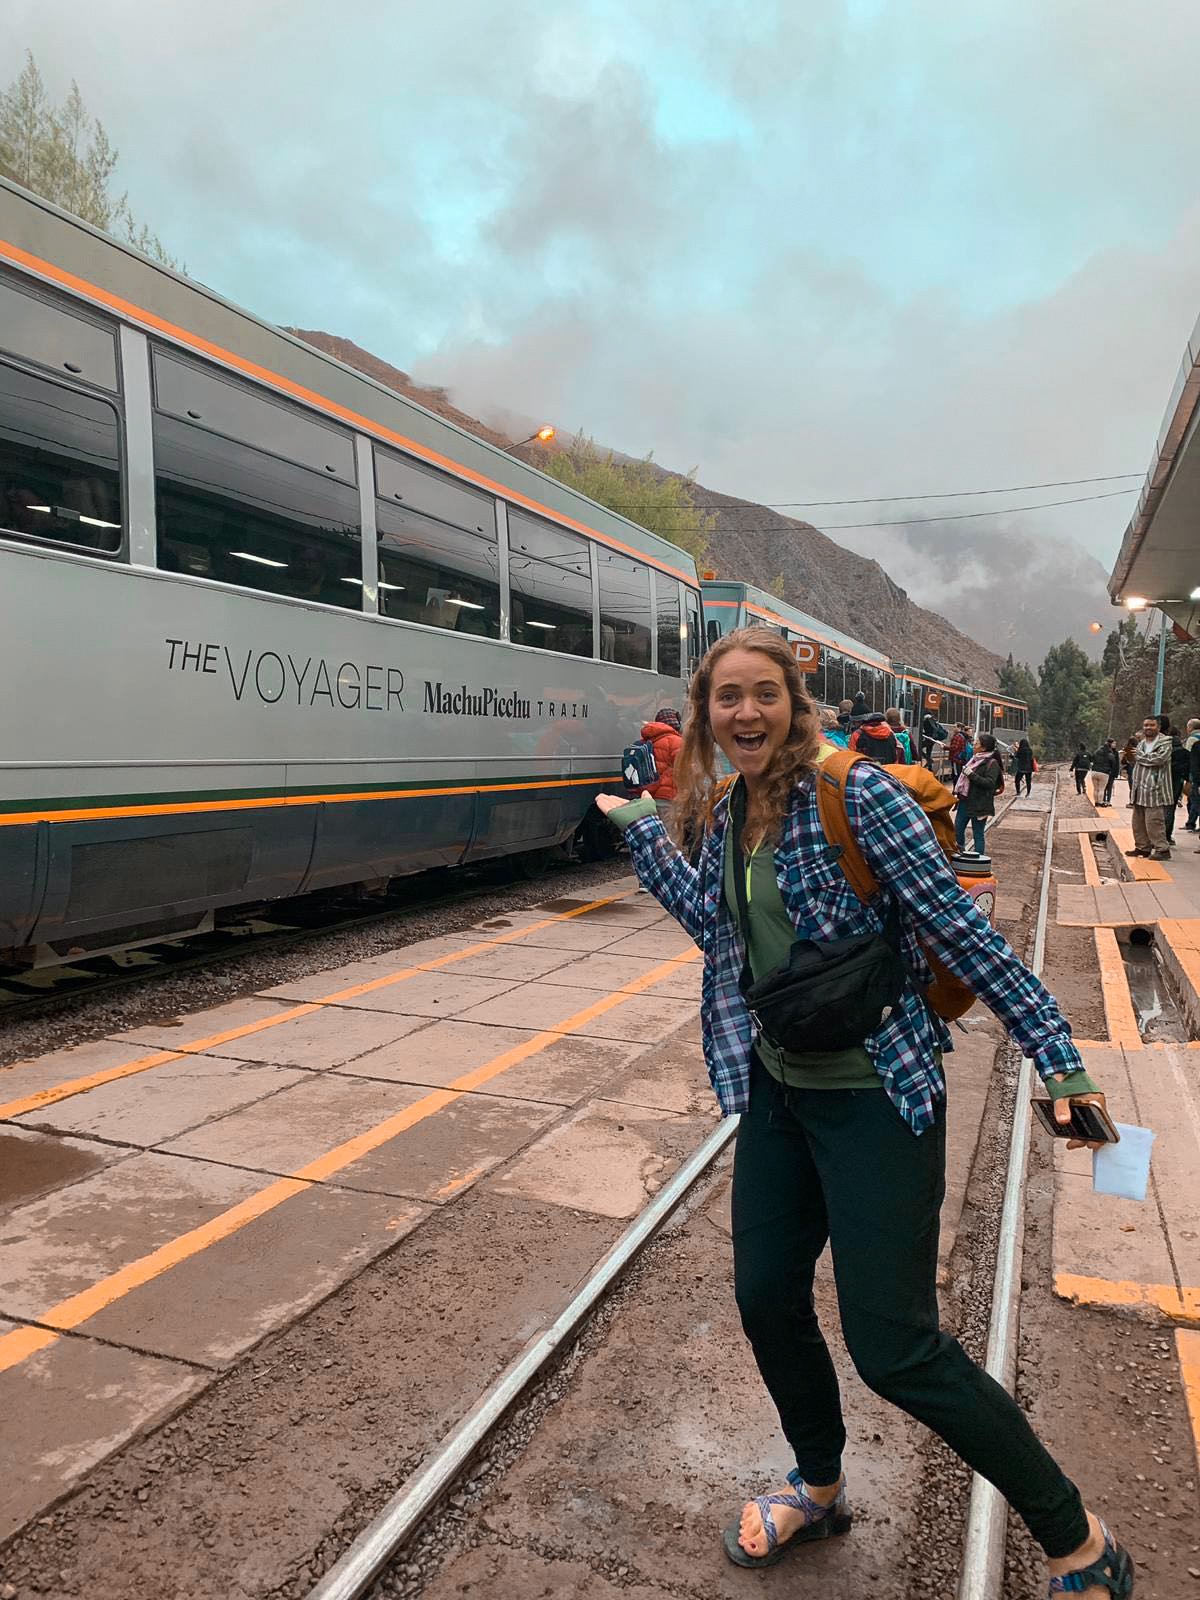 TrovaTrip woman pointing at the voyager Machu Picchu train in Peru